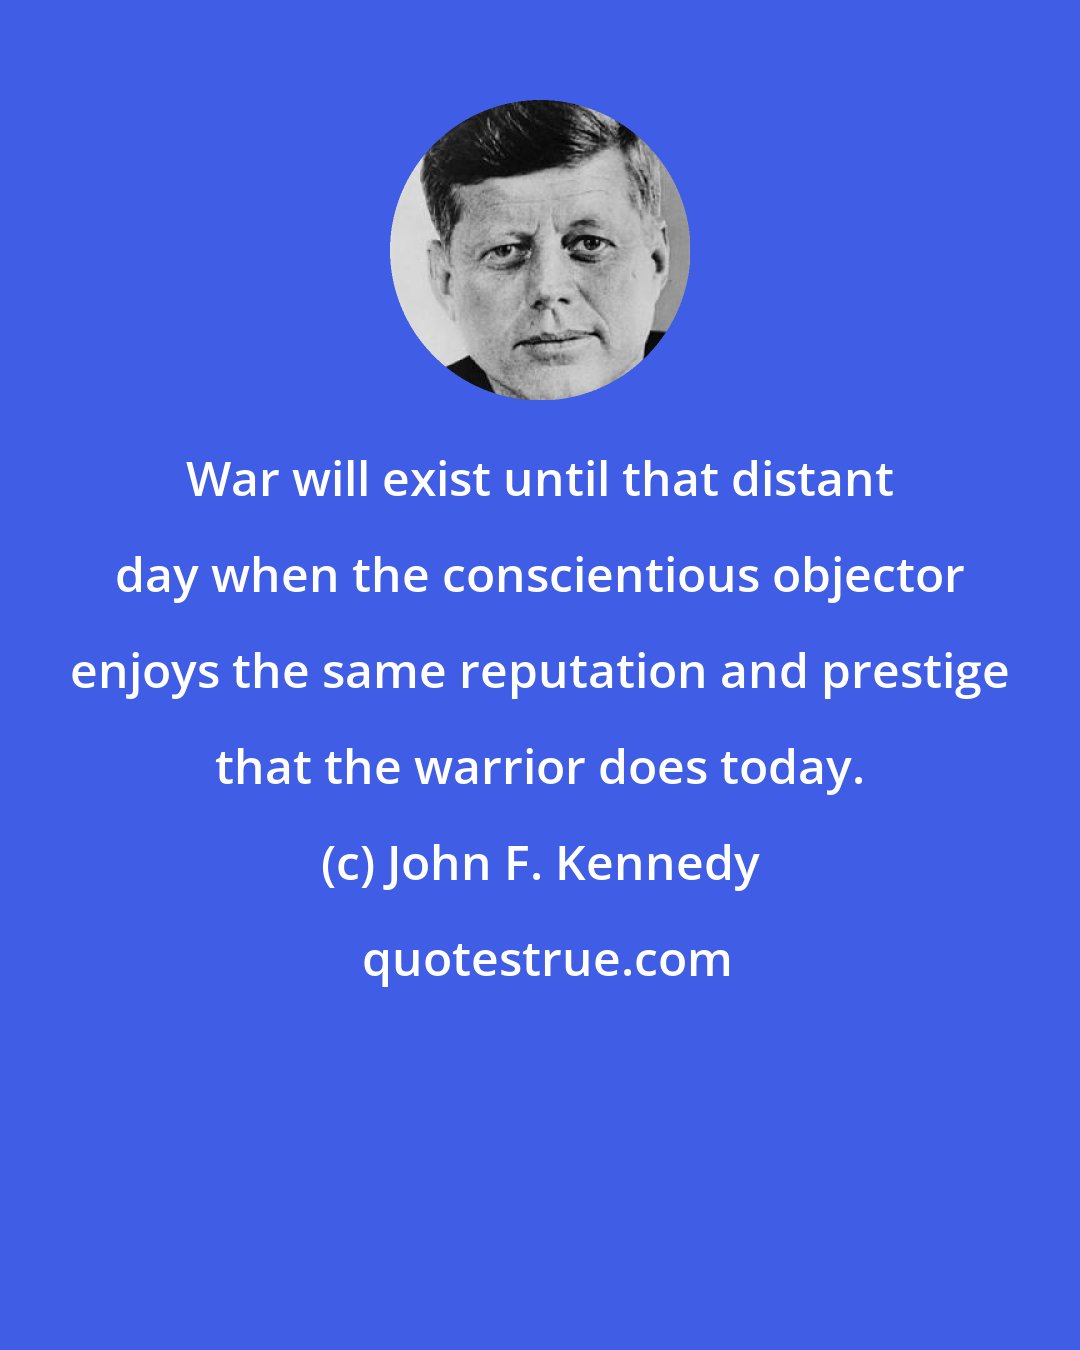 John F. Kennedy: War will exist until that distant day when the conscientious objector enjoys the same reputation and prestige that the warrior does today.